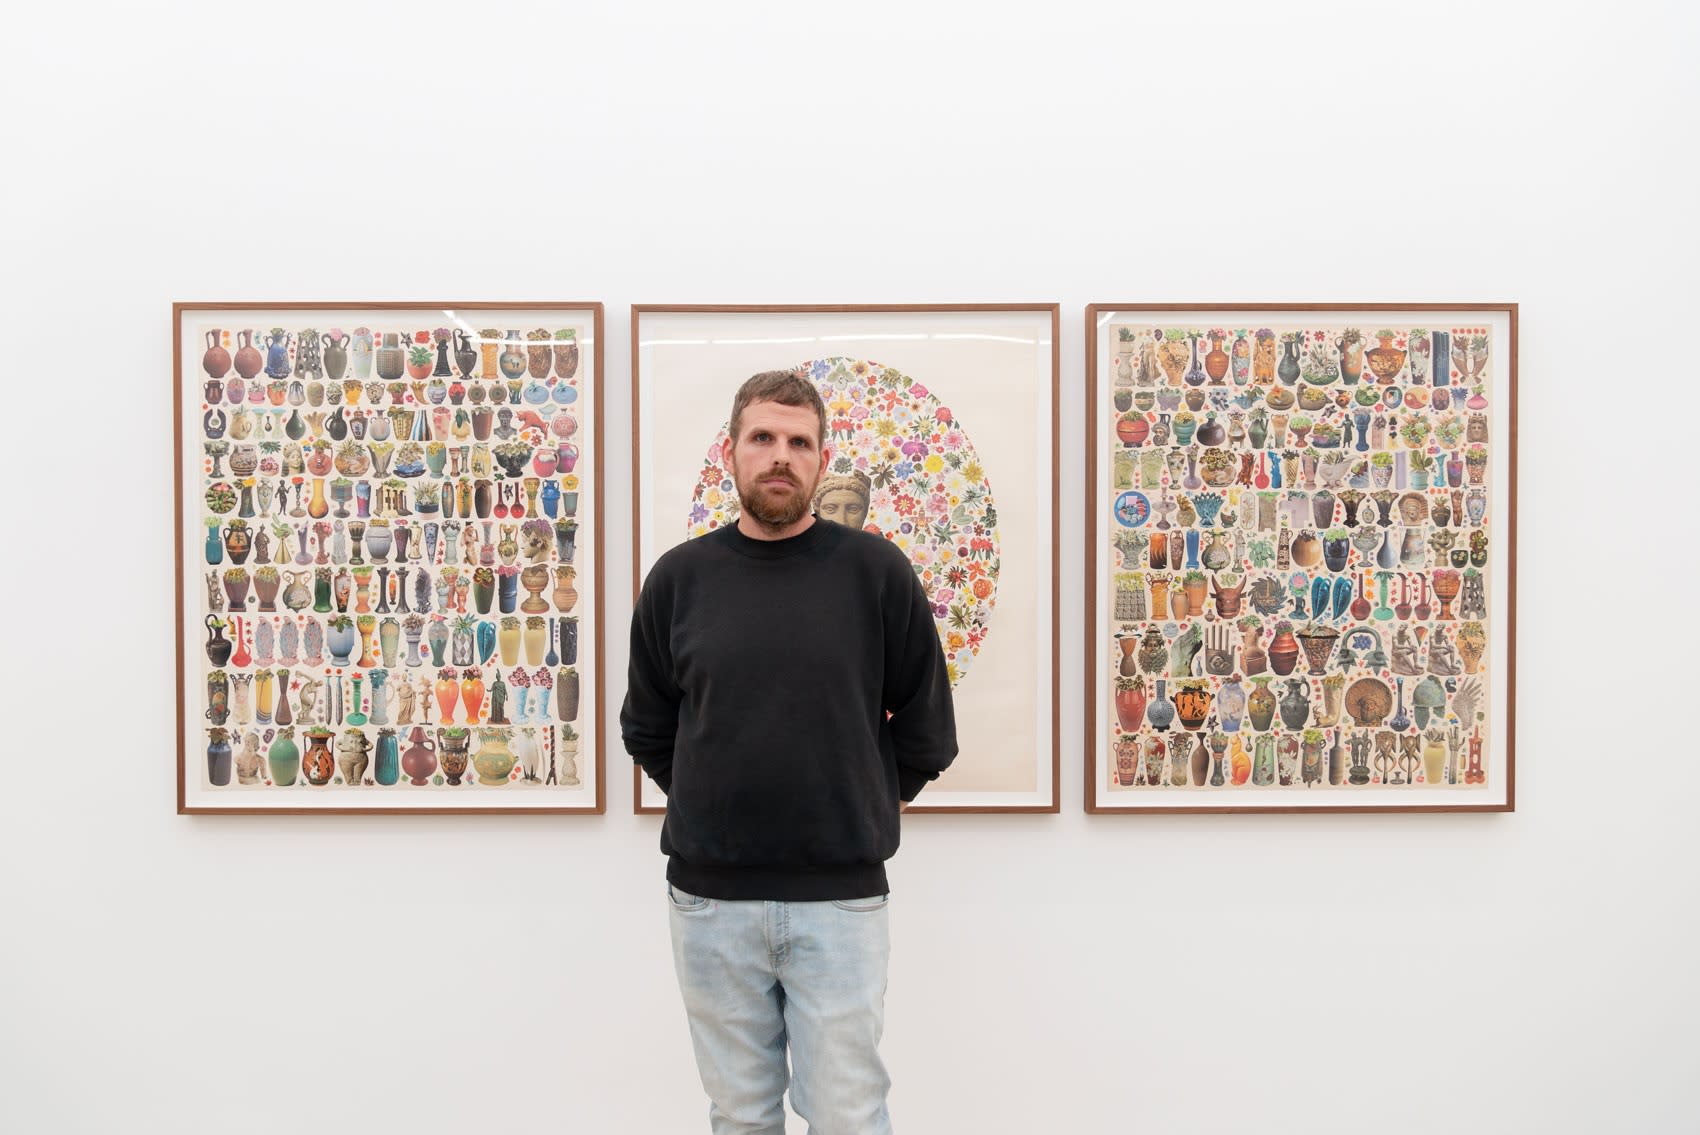 Matthew Craven, a tall man in a black sweater, stands in front of three of his large collage works on paper, framed, in a white cube gallery